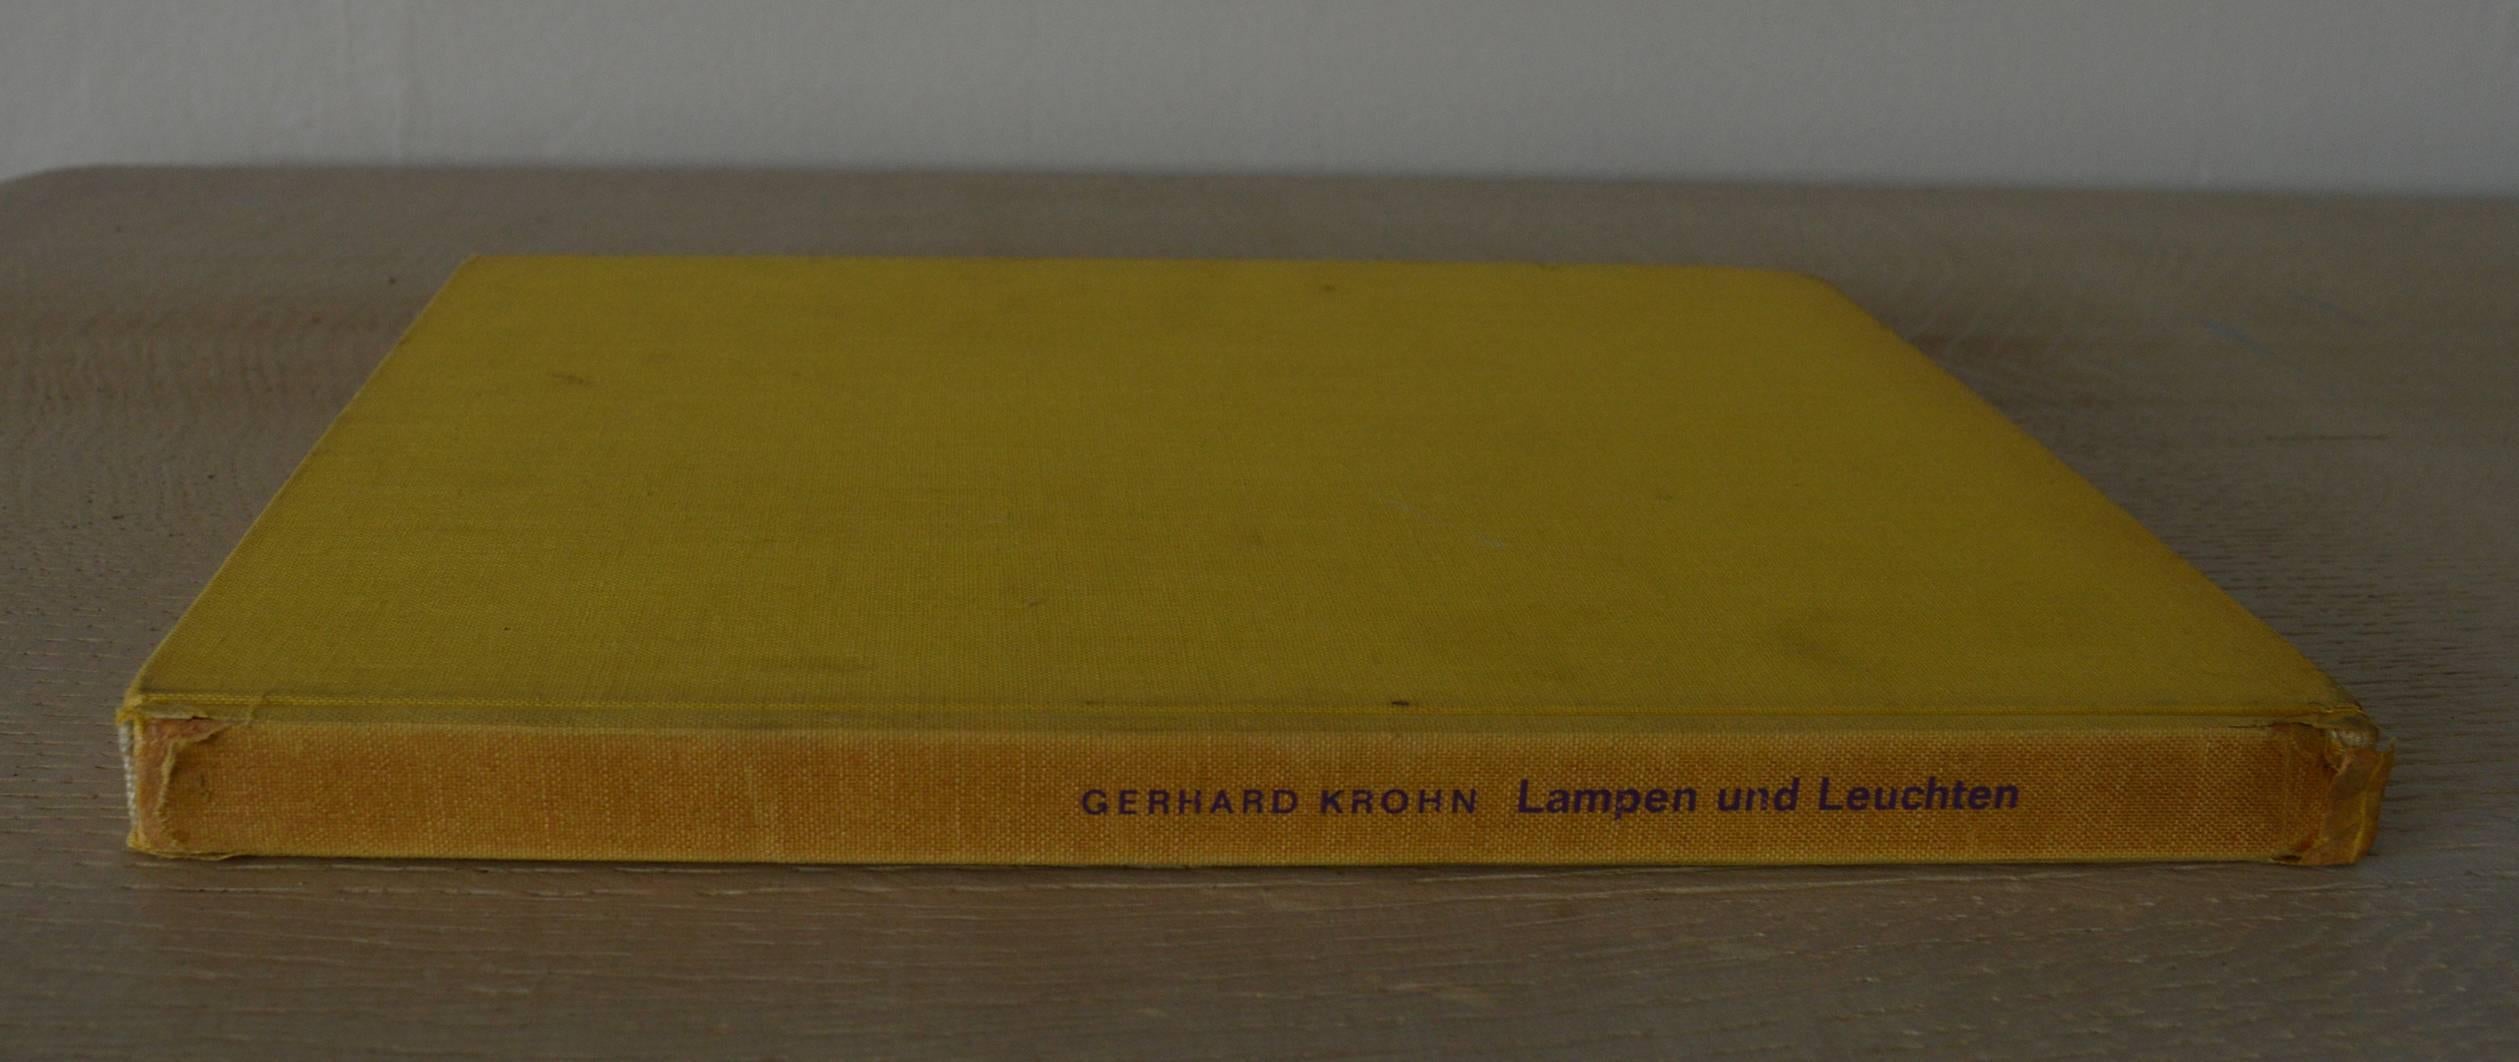 
Lampen Und Leuchten by Gerhard Kohn.

Published by Georg D.W. Callwey, Munich, Germany, 1962.

Yellow cloth binding.

An excellent reference book for dealers and collectors of Mid-Century lighting. Translated to English and other languages.
200